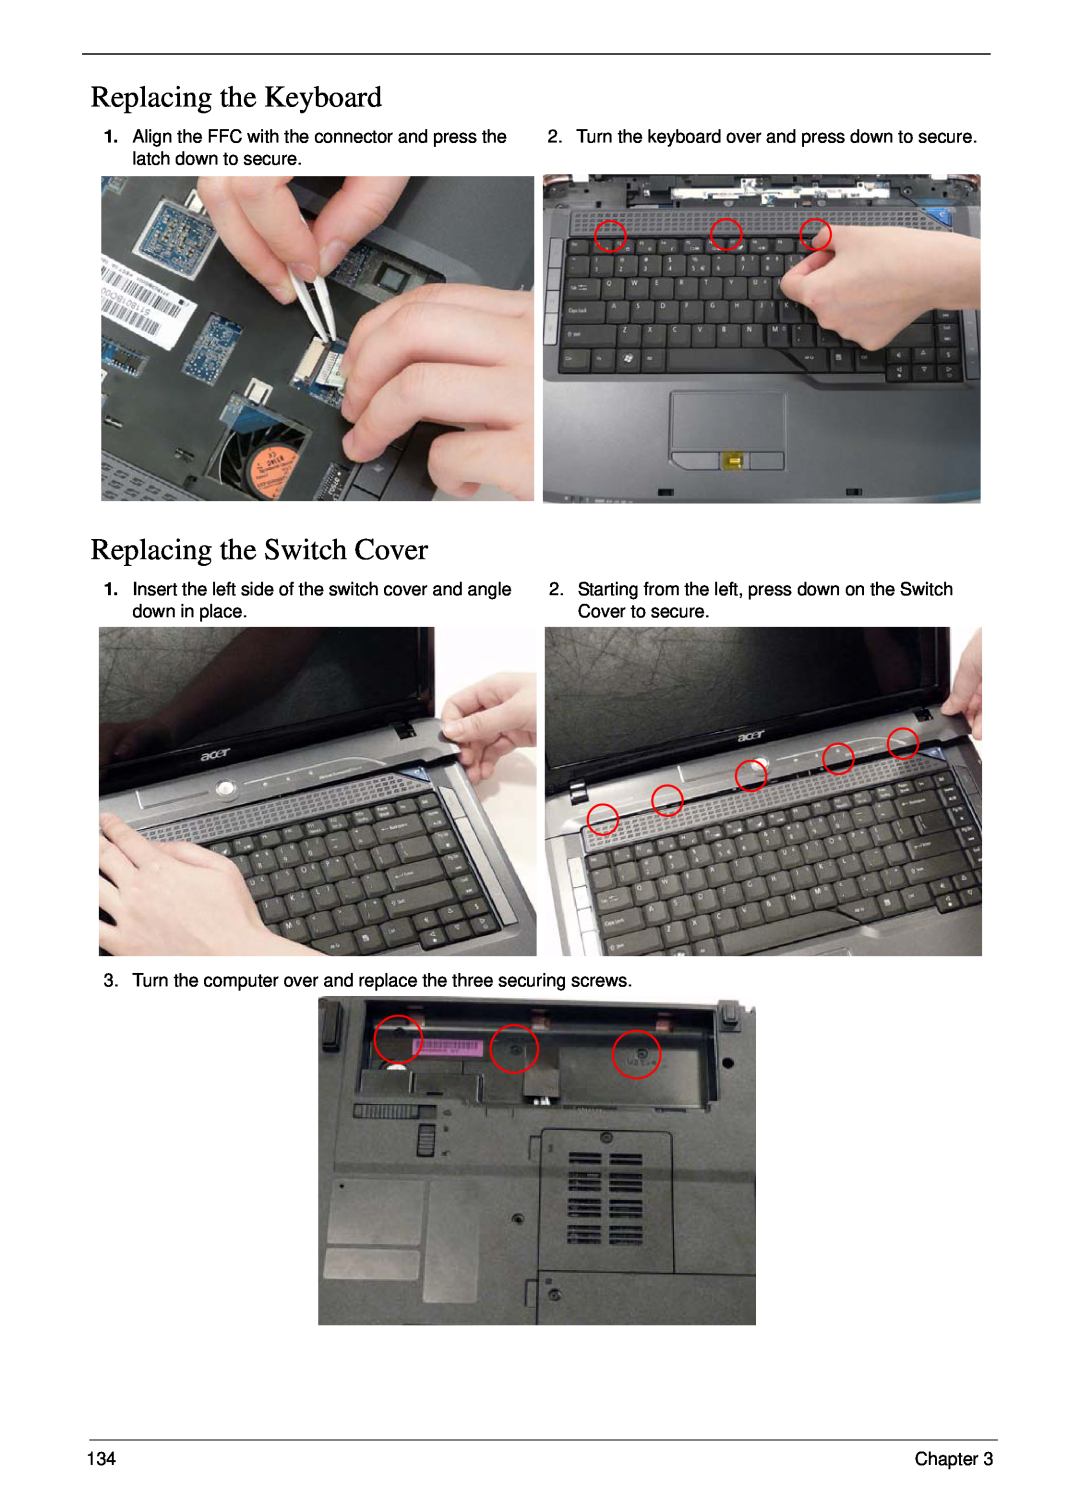 Acer 5530G manual Replacing the Keyboard, Replacing the Switch Cover, Turn the keyboard over and press down to secure 